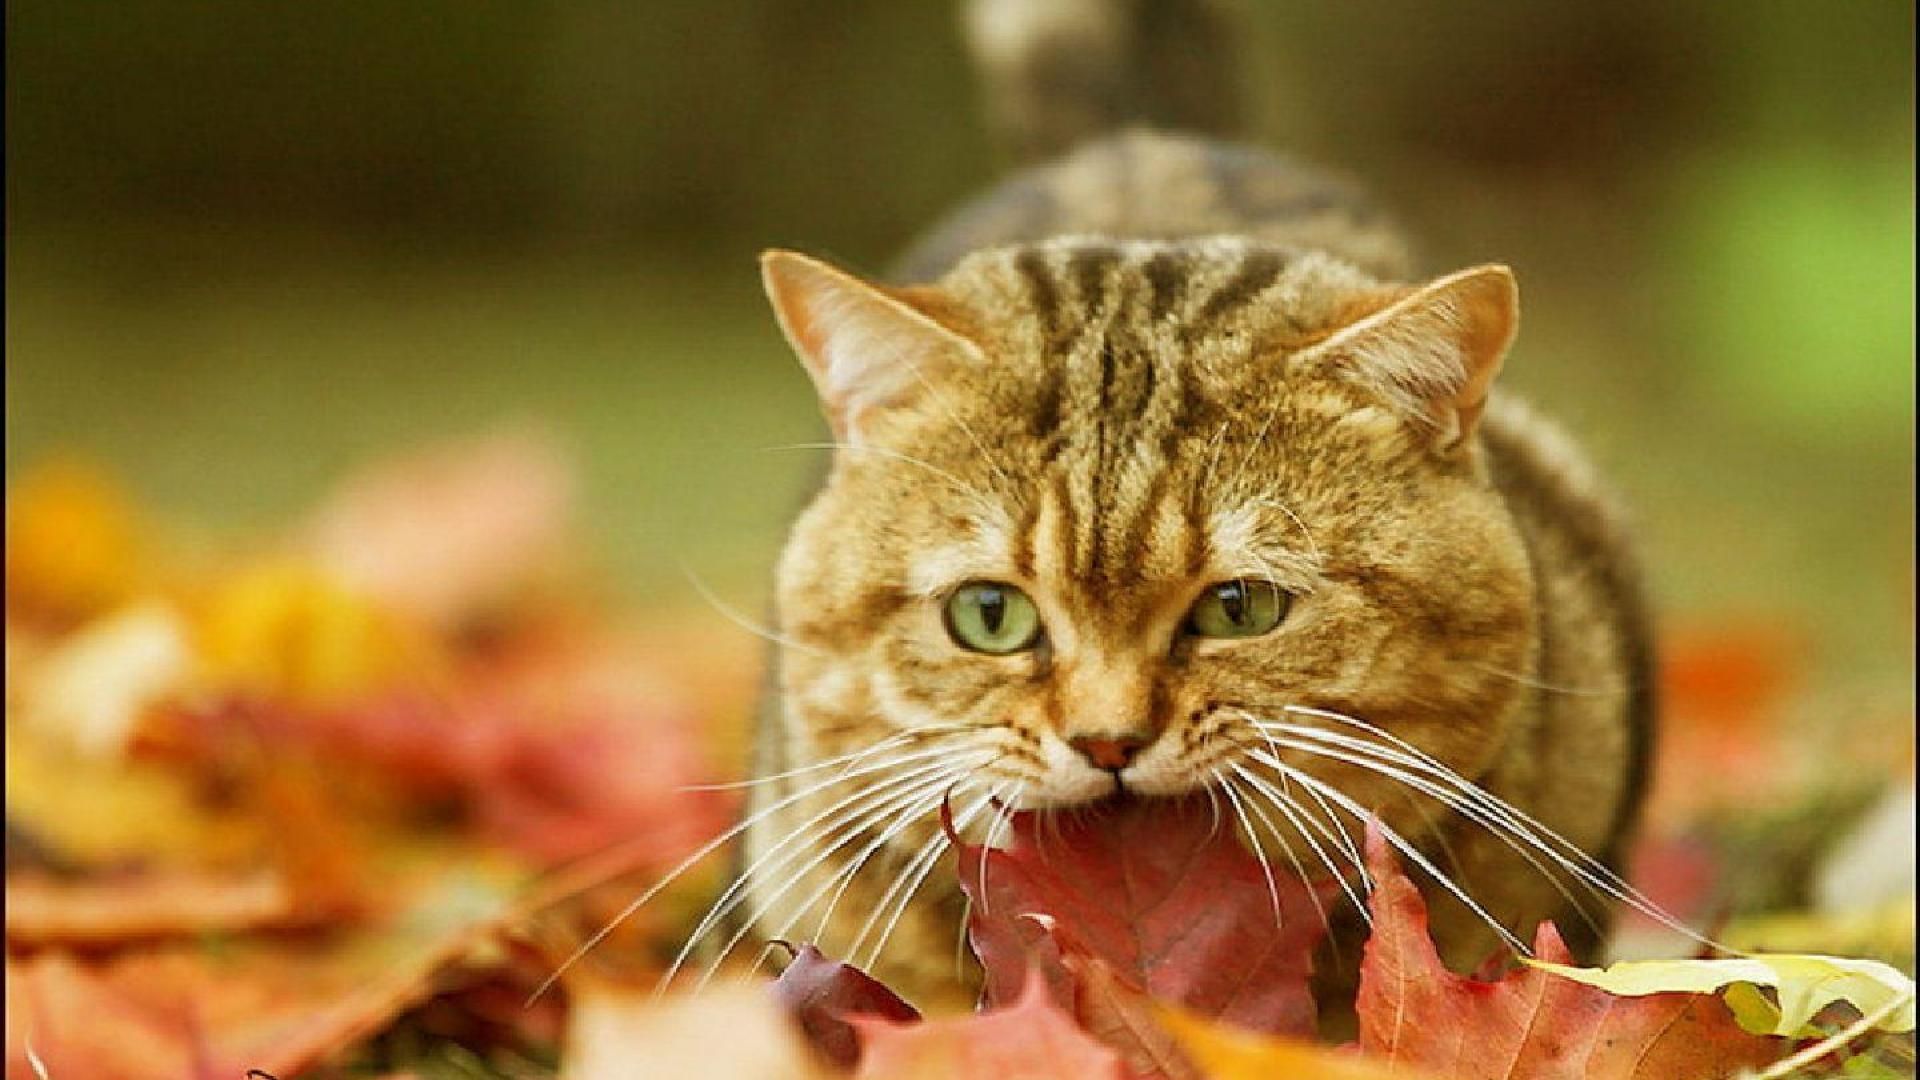 cat autumn leaves wallpaper 1920x1080 12134. Cats, Animals, Pet holiday